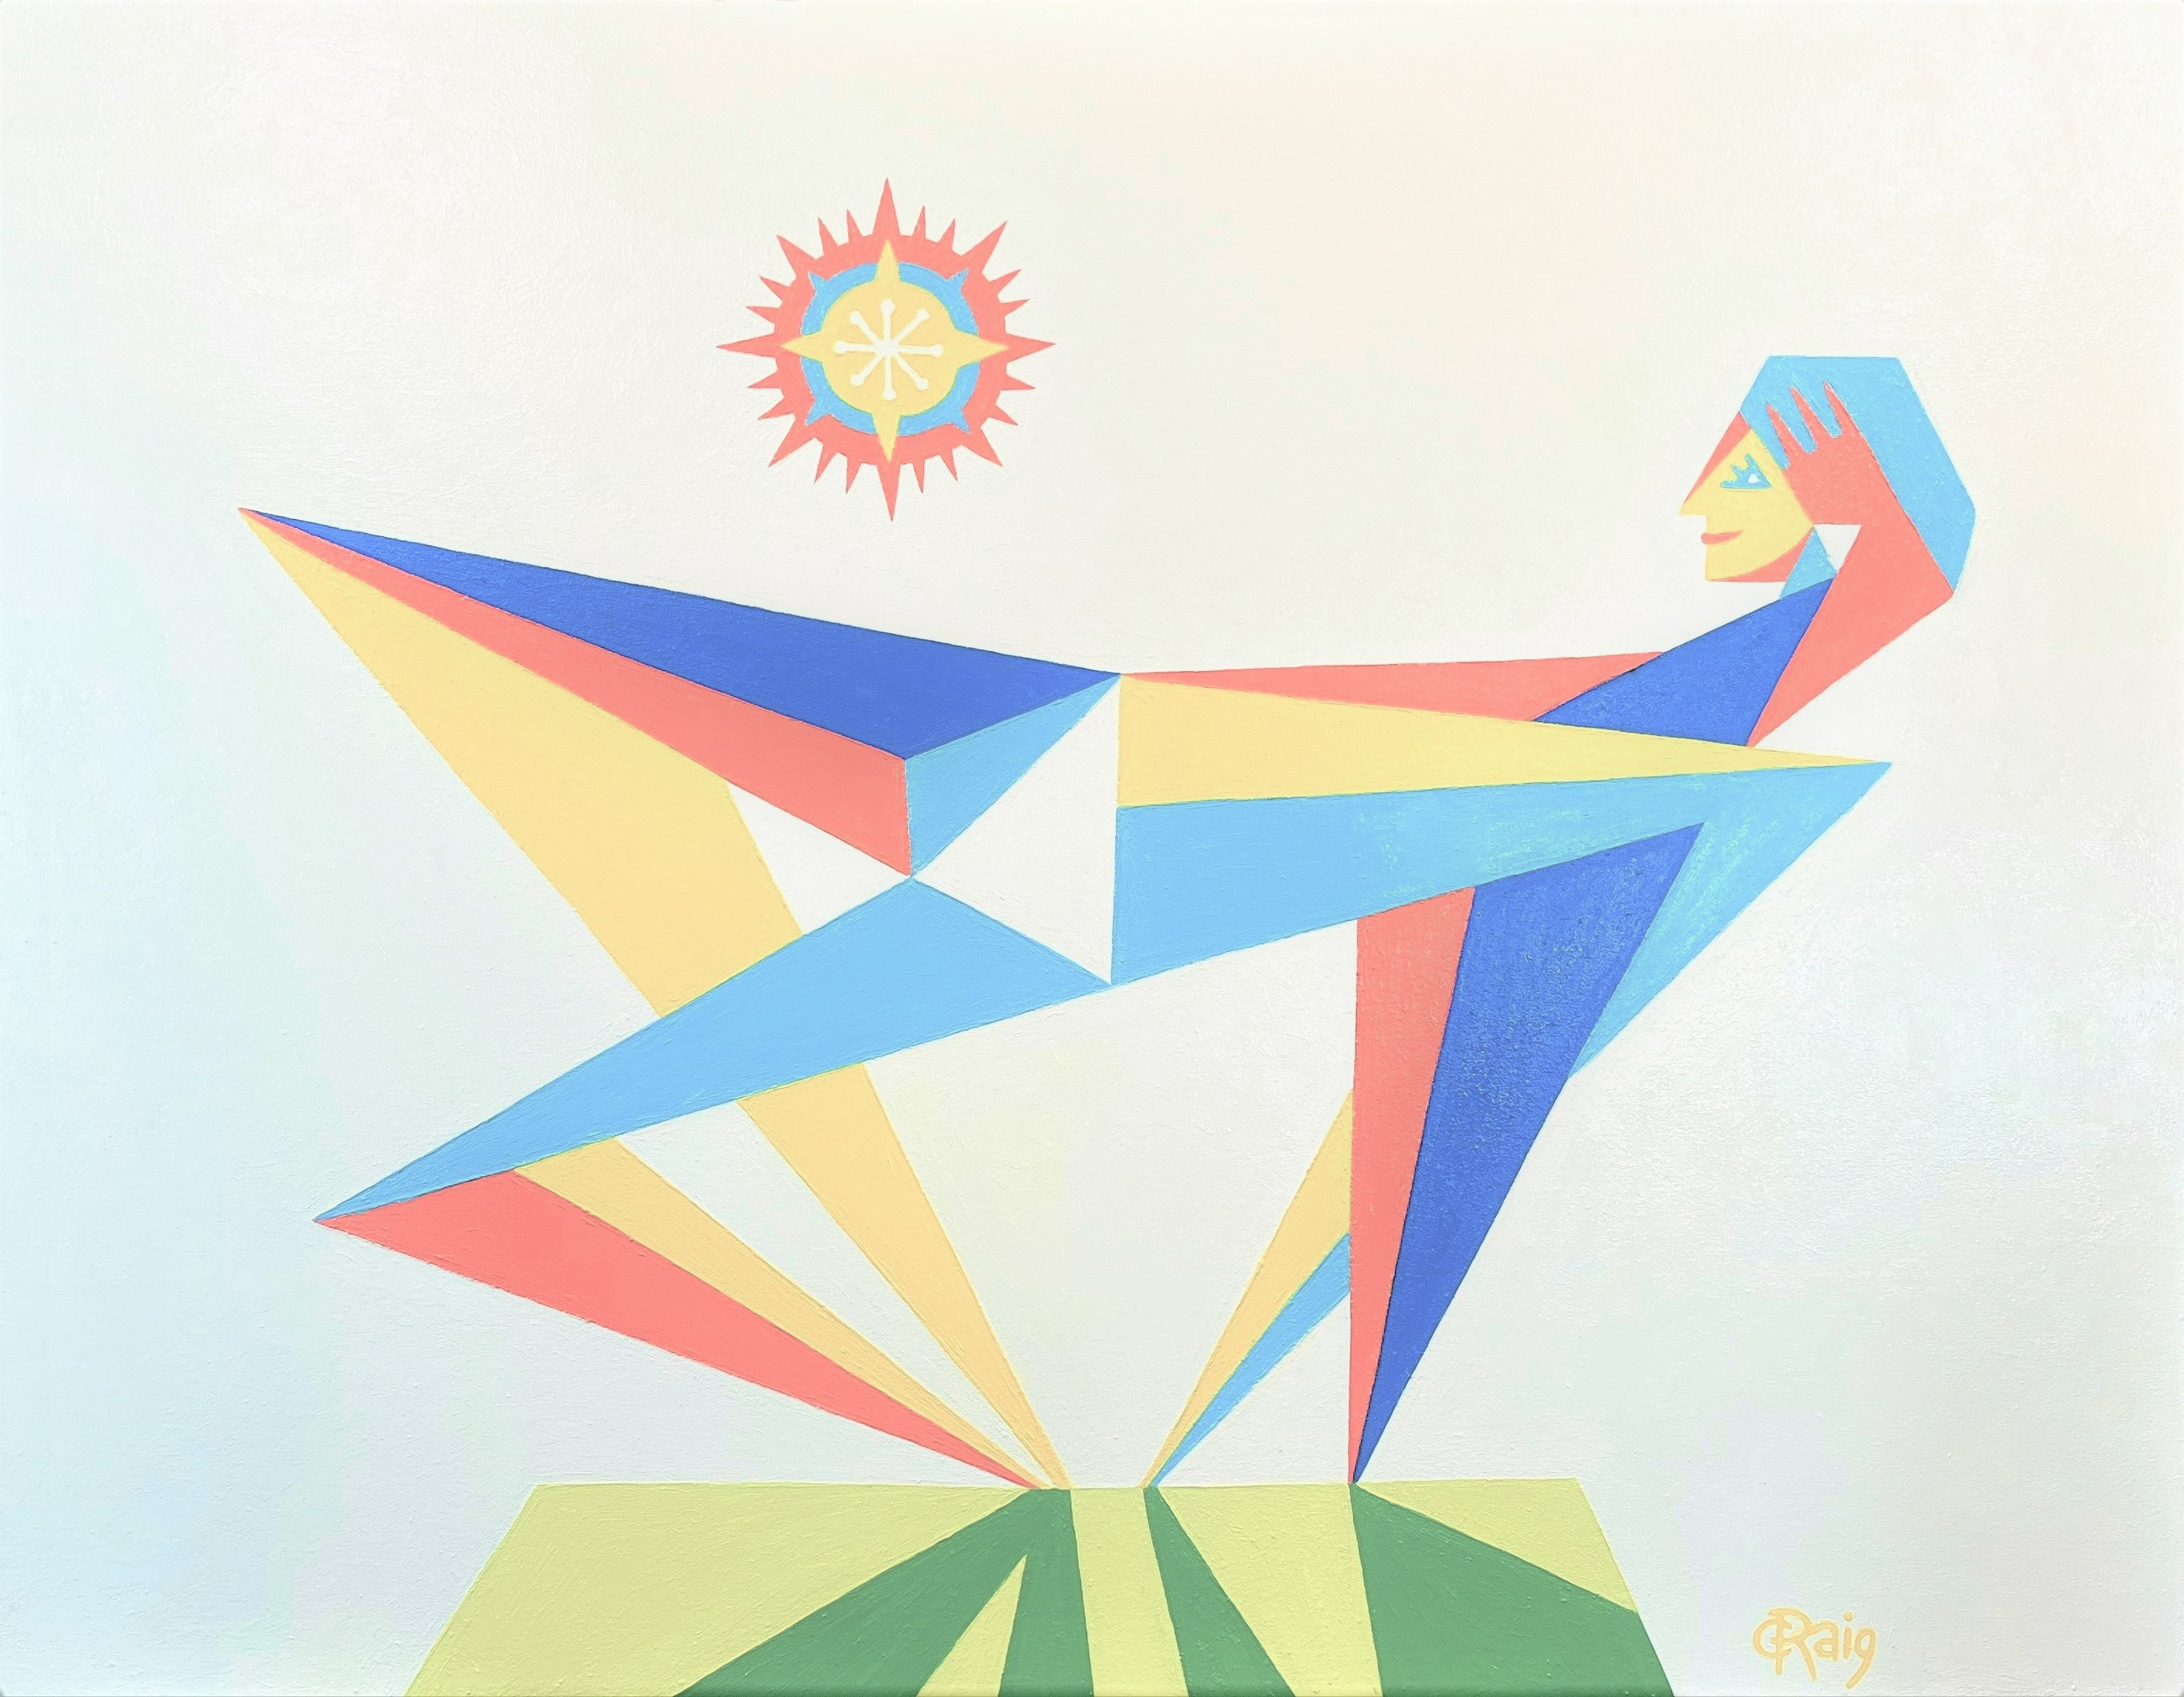 Painting: MORNING YOGA, 46 by 59 inches